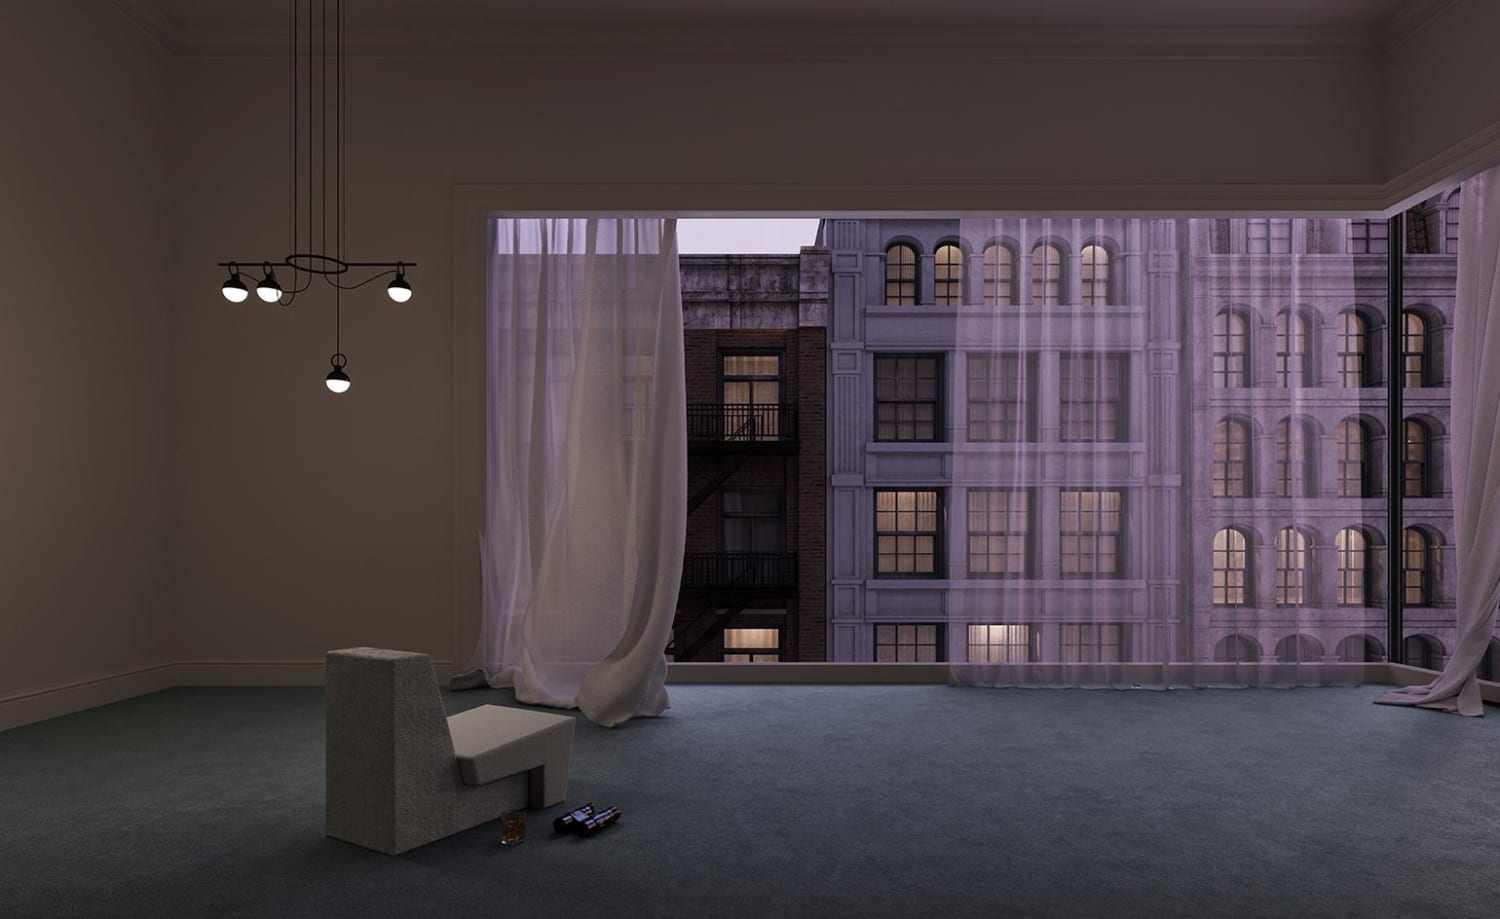 Hitchcock movies set the mood for this virtual interior design project